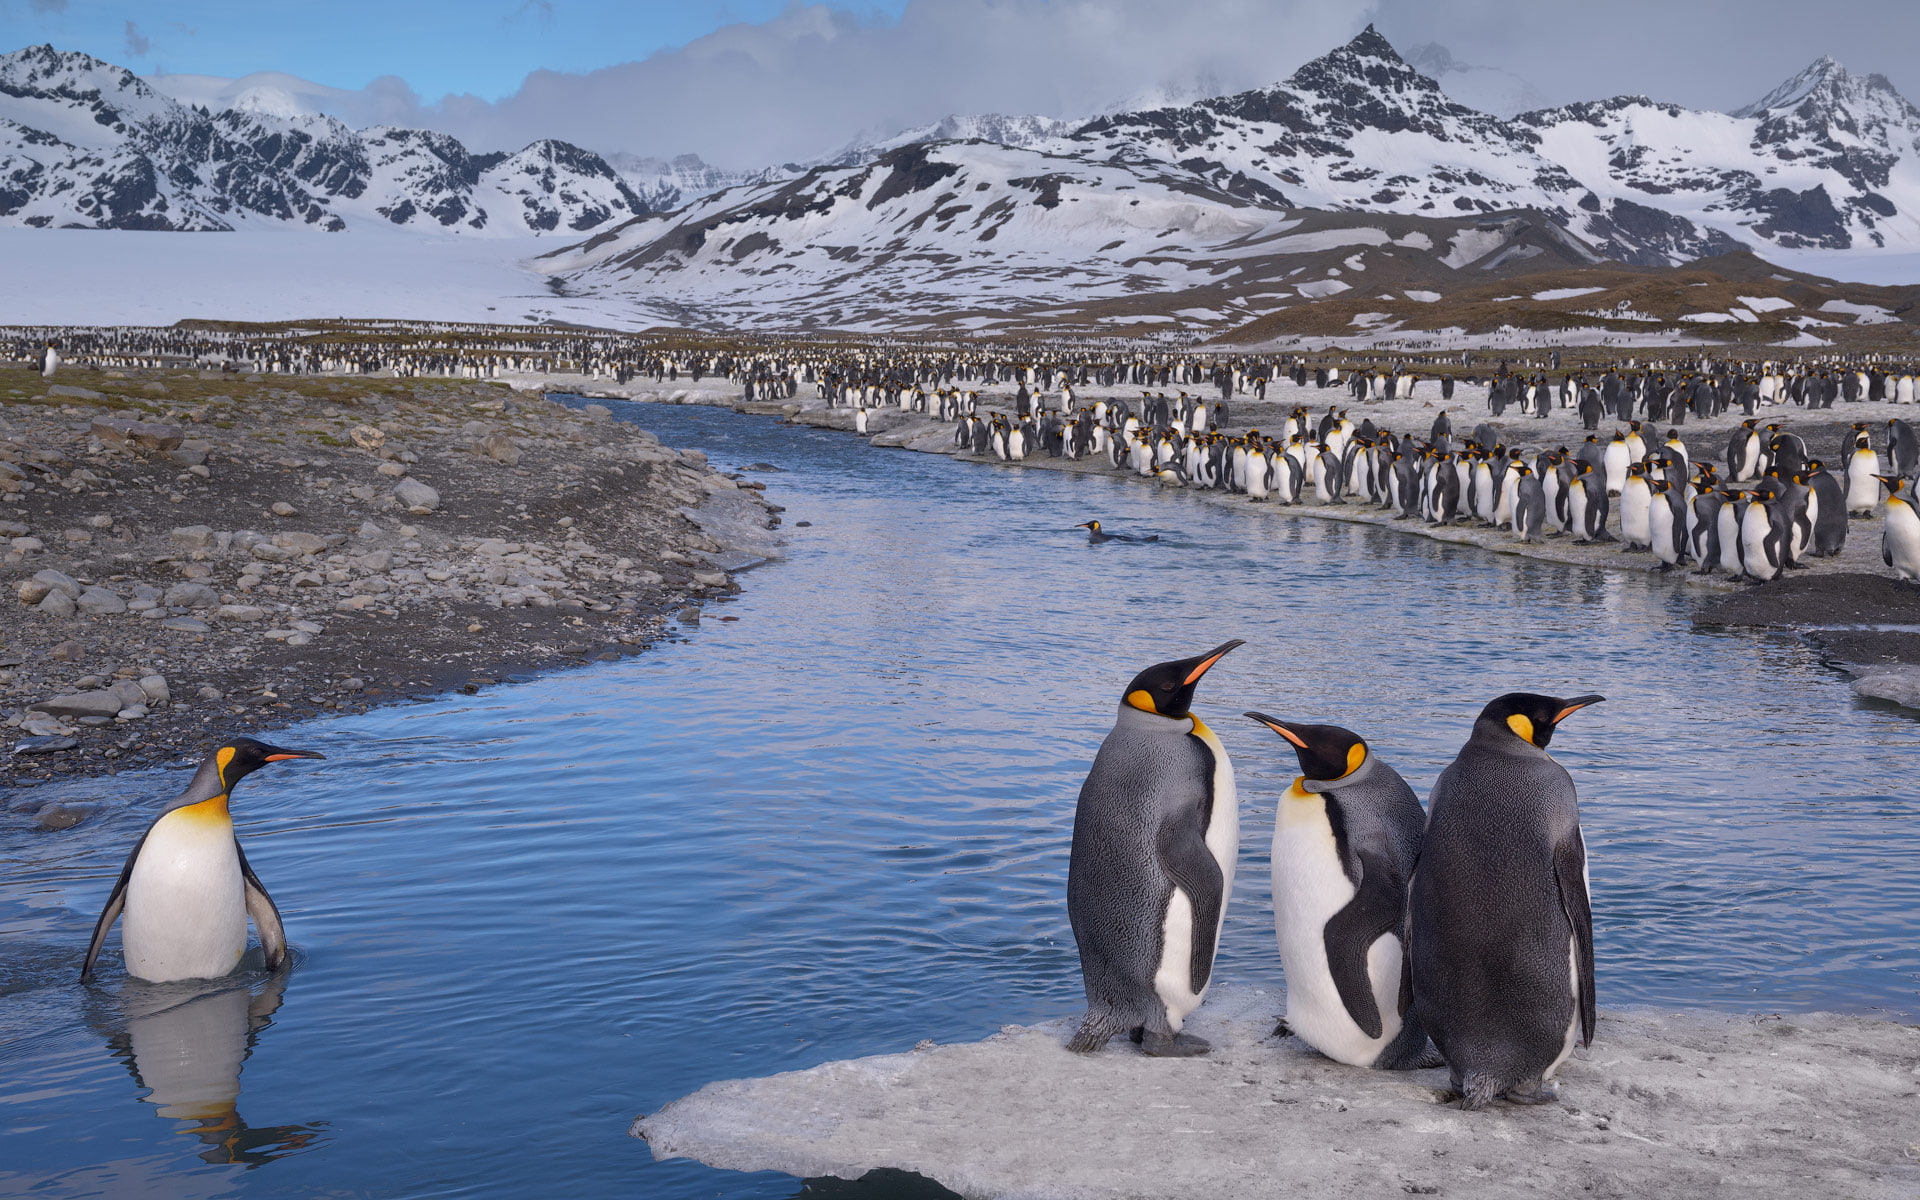 Saint Andrews Bay South Georgia King Penguin Aptenodytes Patagonicus Colony Desktop Hd Wallpaper For Mobile Phones Tablet And Pc 1920×1200